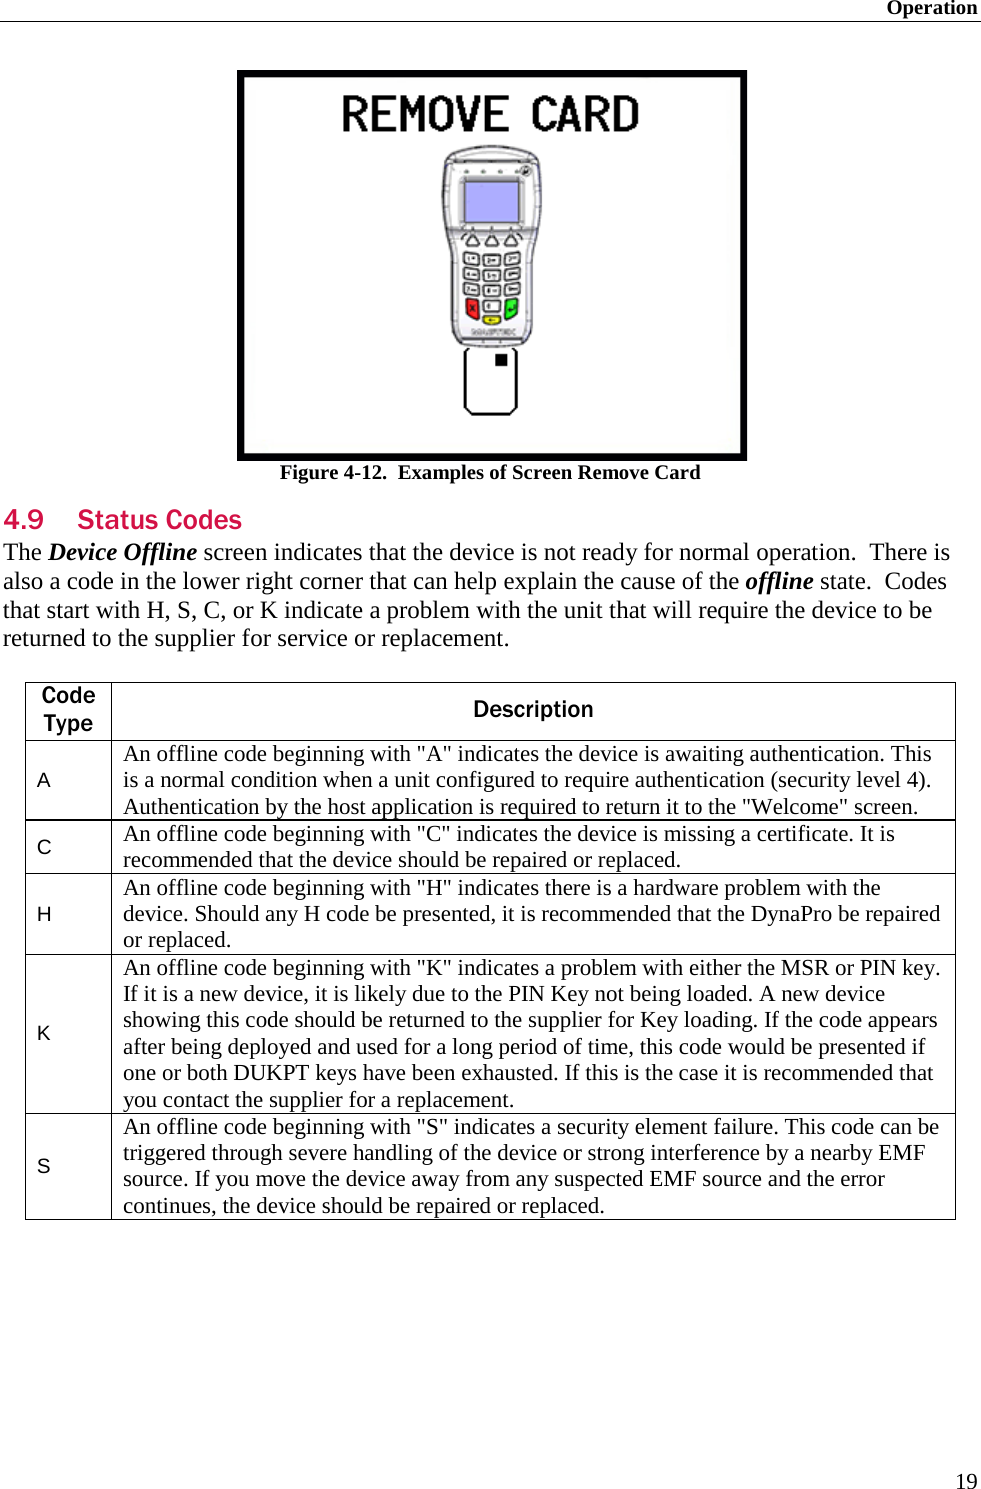 Operation 19  Figure 4-12.  Examples of Screen Remove Card 4.9 Status Codes The Device Offline screen indicates that the device is not ready for normal operation.  There is also a code in the lower right corner that can help explain the cause of the offline state.  Codes that start with H, S, C, or K indicate a problem with the unit that will require the device to be returned to the supplier for service or replacement.  Code Type Description A An offline code beginning with &quot;A&quot; indicates the device is awaiting authentication. This is a normal condition when a unit configured to require authentication (security level 4). Authentication by the host application is required to return it to the &quot;Welcome&quot; screen. C An offline code beginning with &quot;C&quot; indicates the device is missing a certificate. It is recommended that the device should be repaired or replaced. H An offline code beginning with &quot;H&quot; indicates there is a hardware problem with the device. Should any H code be presented, it is recommended that the DynaPro be repaired or replaced. K An offline code beginning with &quot;K&quot; indicates a problem with either the MSR or PIN key. If it is a new device, it is likely due to the PIN Key not being loaded. A new device showing this code should be returned to the supplier for Key loading. If the code appears after being deployed and used for a long period of time, this code would be presented if one or both DUKPT keys have been exhausted. If this is the case it is recommended that you contact the supplier for a replacement. S An offline code beginning with &quot;S&quot; indicates a security element failure. This code can be triggered through severe handling of the device or strong interference by a nearby EMF source. If you move the device away from any suspected EMF source and the error continues, the device should be repaired or replaced.  